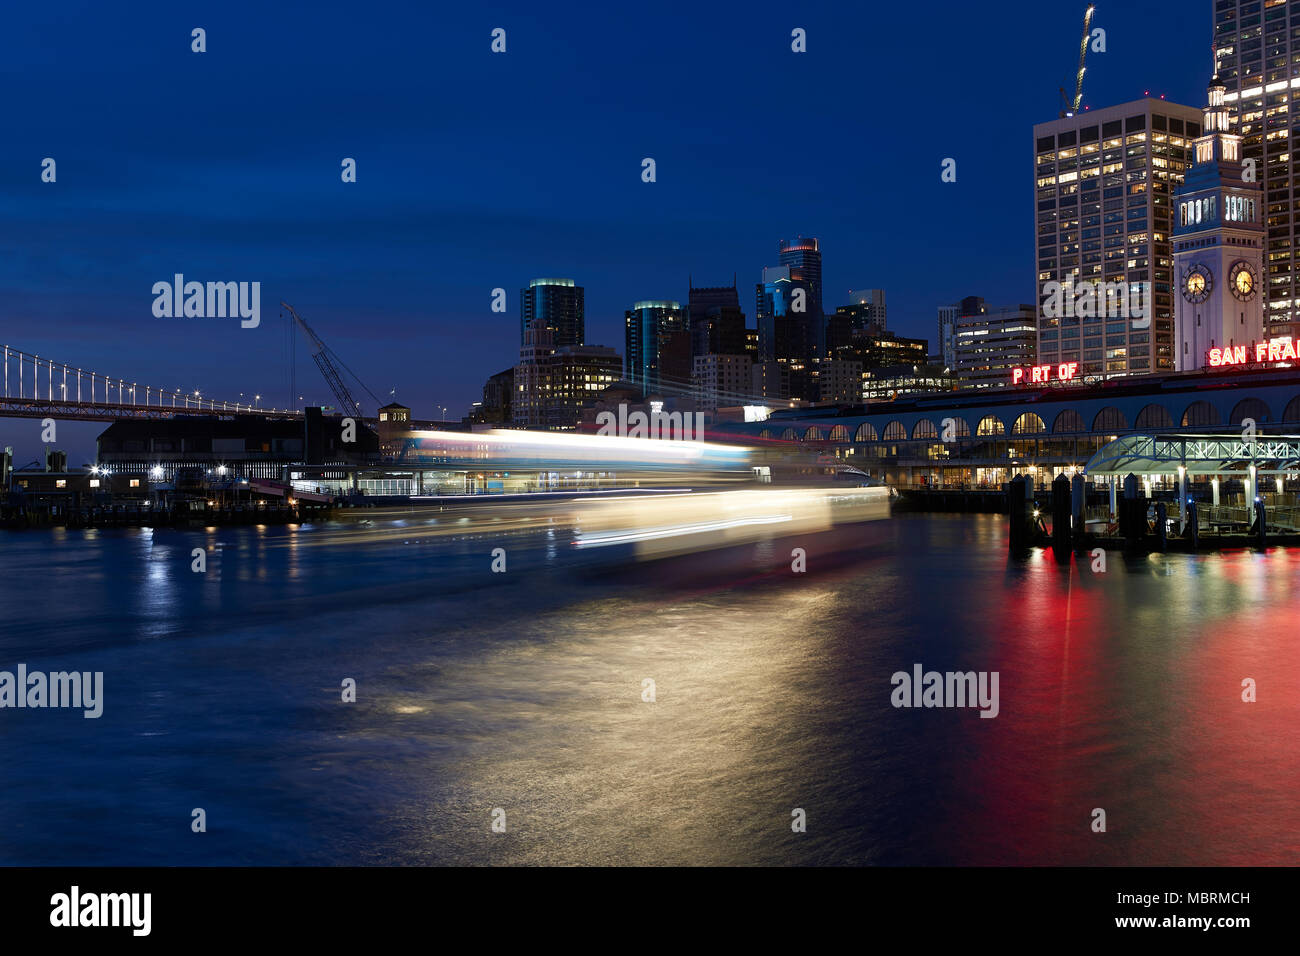 Motion Blur (Light Trail) Of An Arriving Ferry At The San Francisco Ferry Building Before Sunrise. Stock Photo